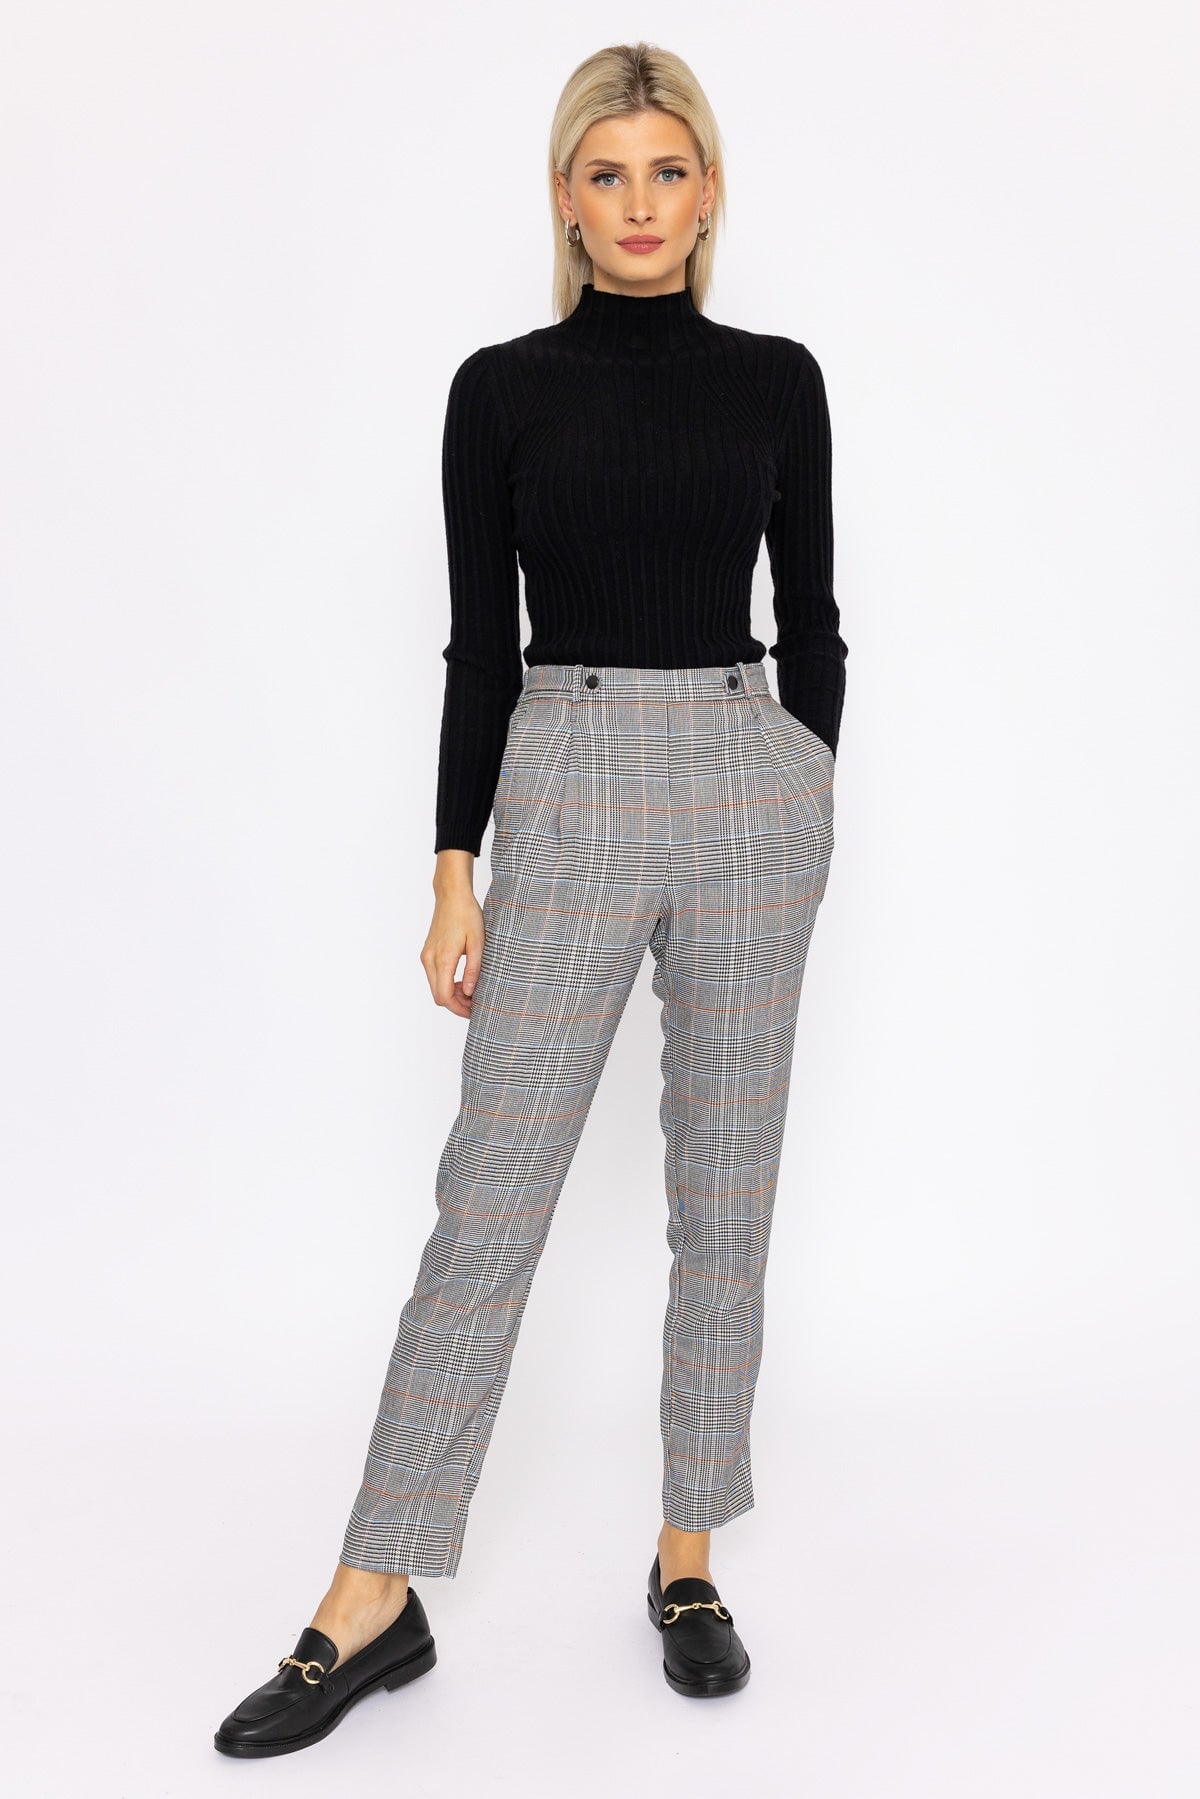 UNIQLO Ankle Length Trousers Pants Black Gingham Check Print Size XS | eBay